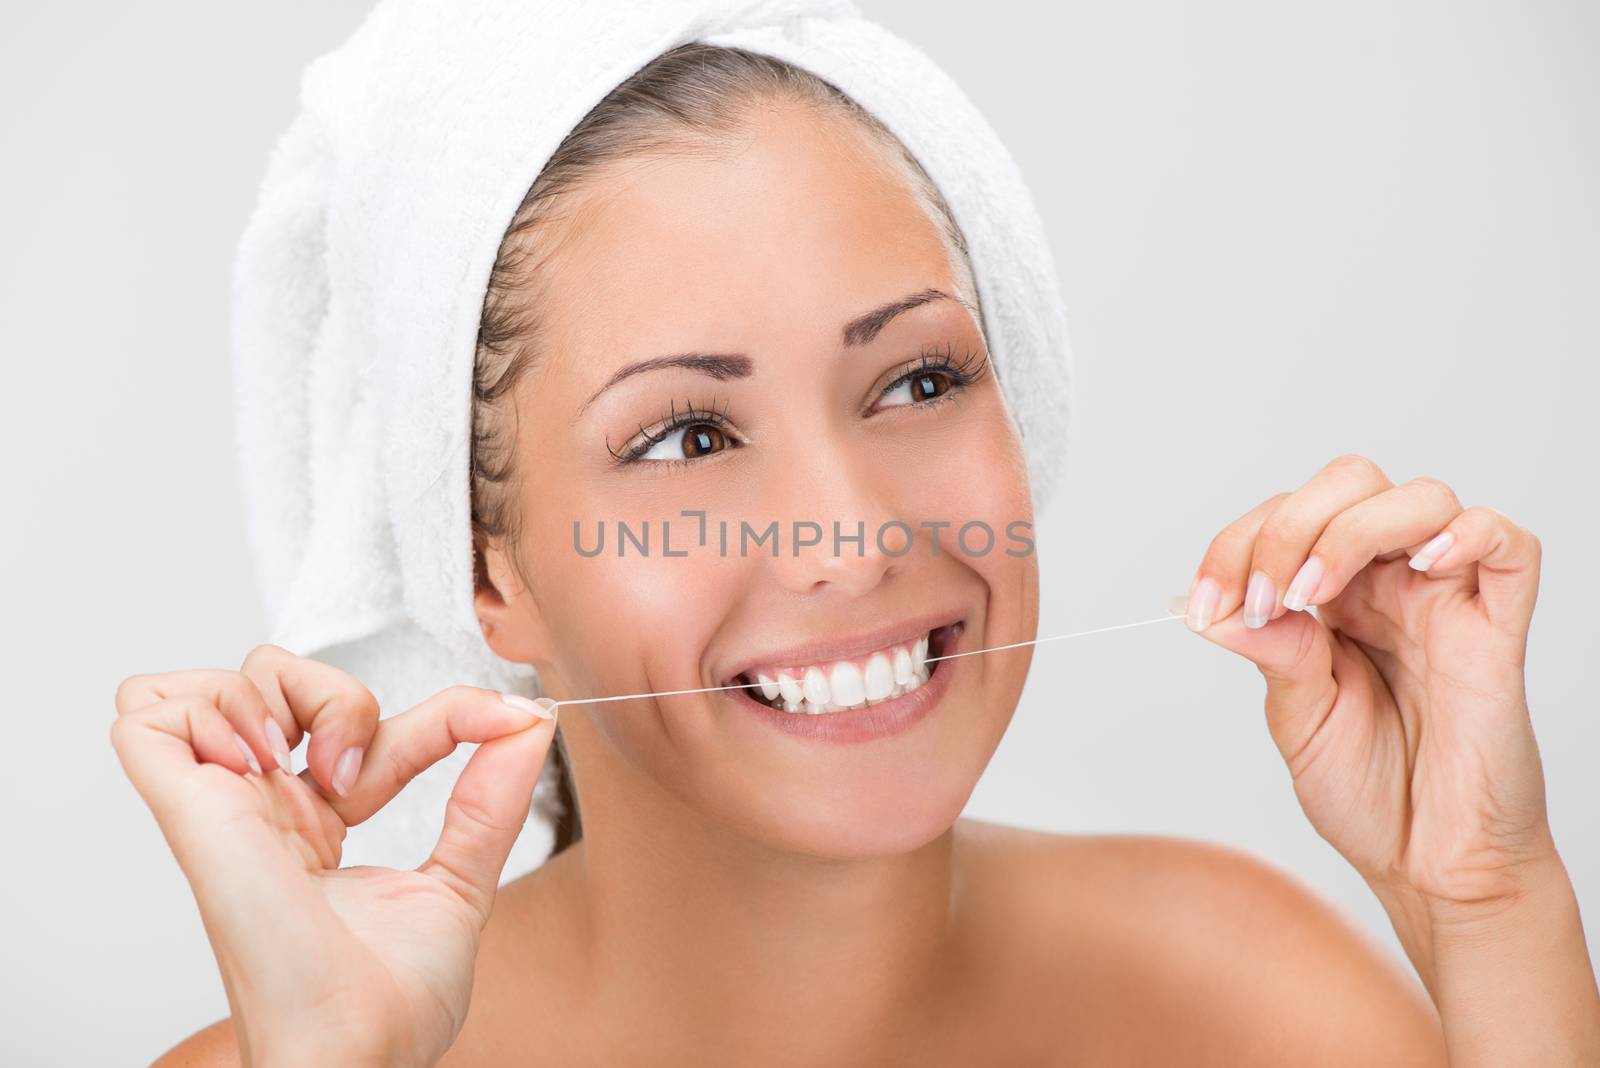 Cute girl preparing to start her day. She is cleaning teeth with dental floss. Looking at camera and smiling.